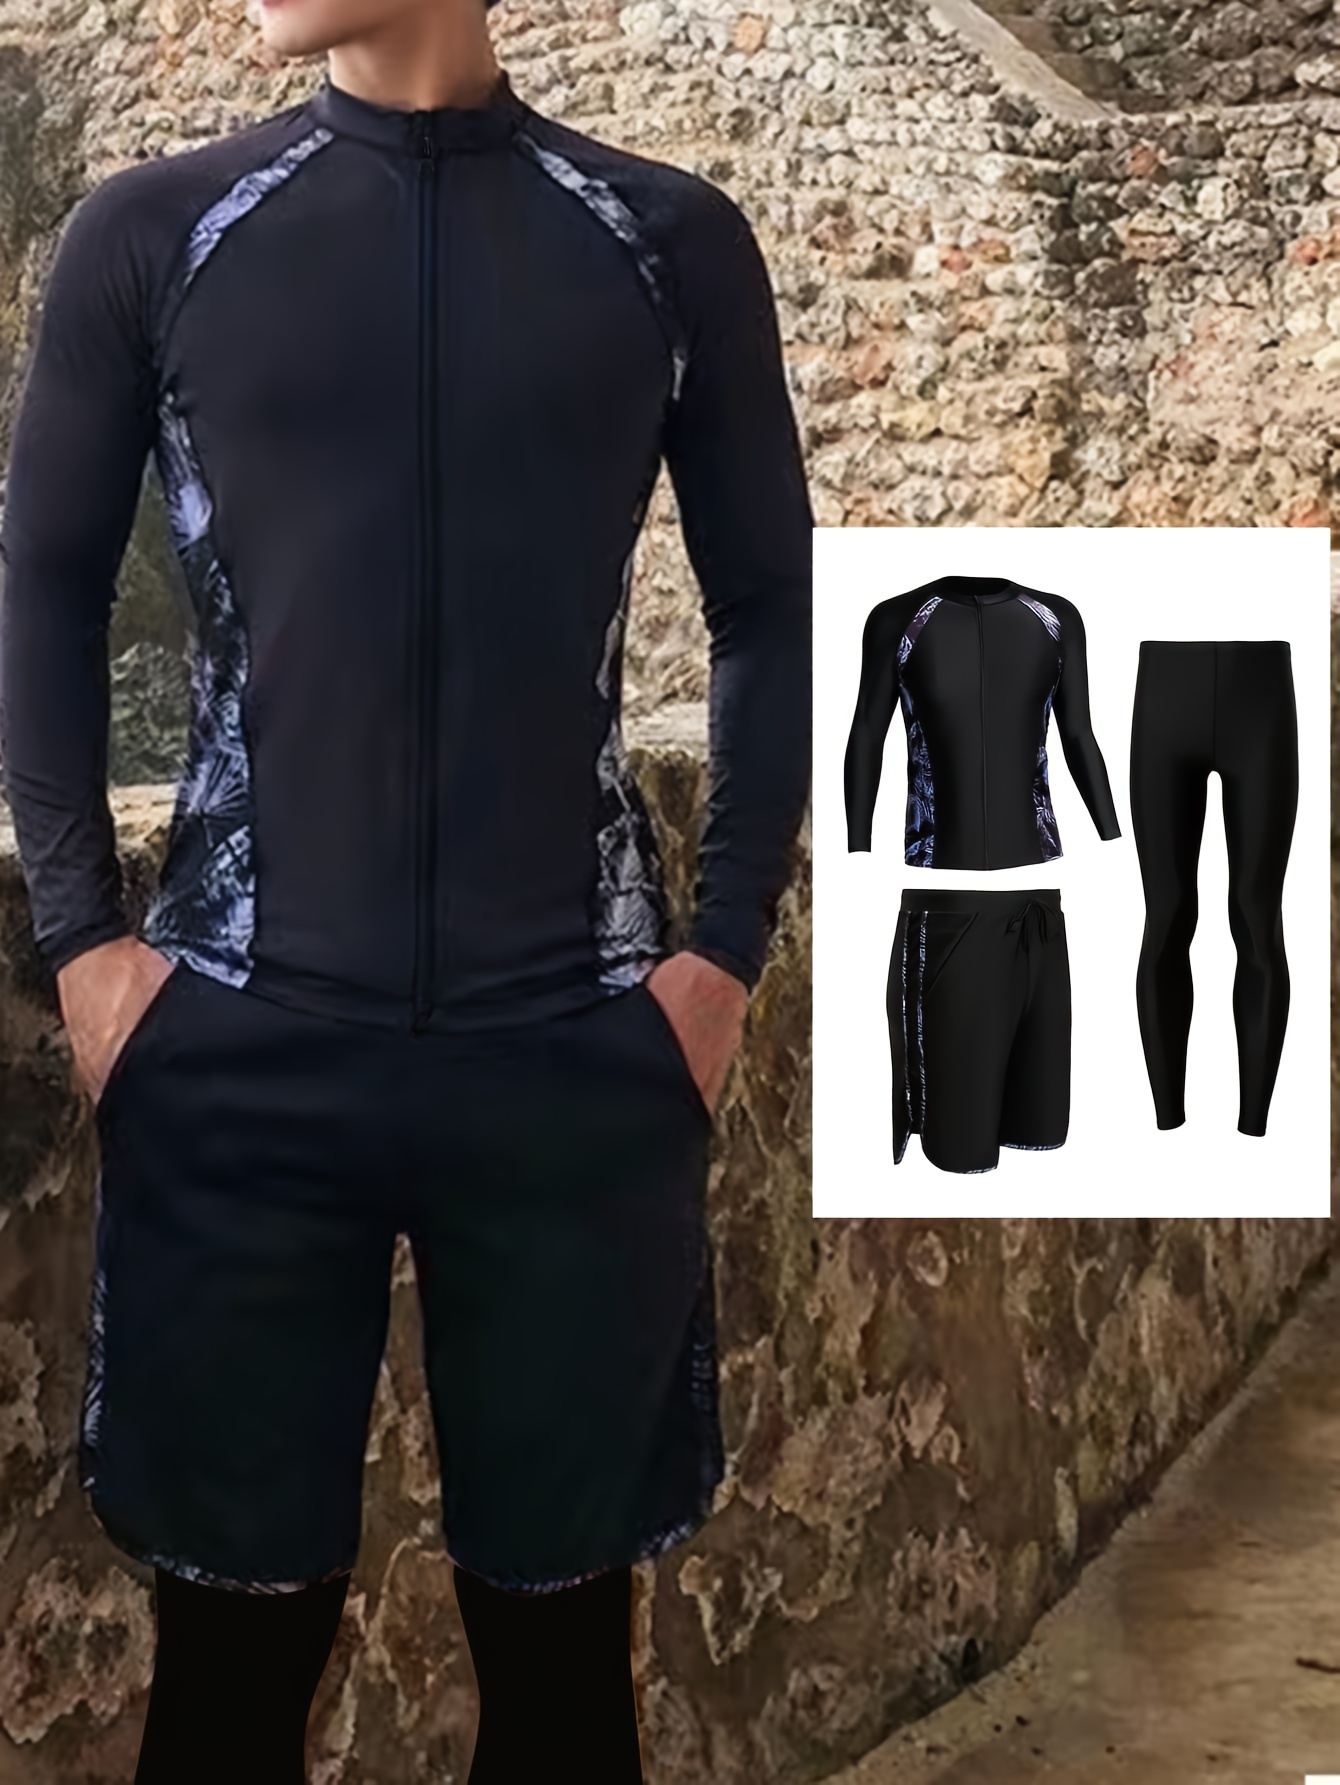 Realon Shorty Wetsuit For Men, 2mm Neoprene Short Sleeve Wet Suit With Back  Zip, Stretch Skinny Wet Suit For Water Sports